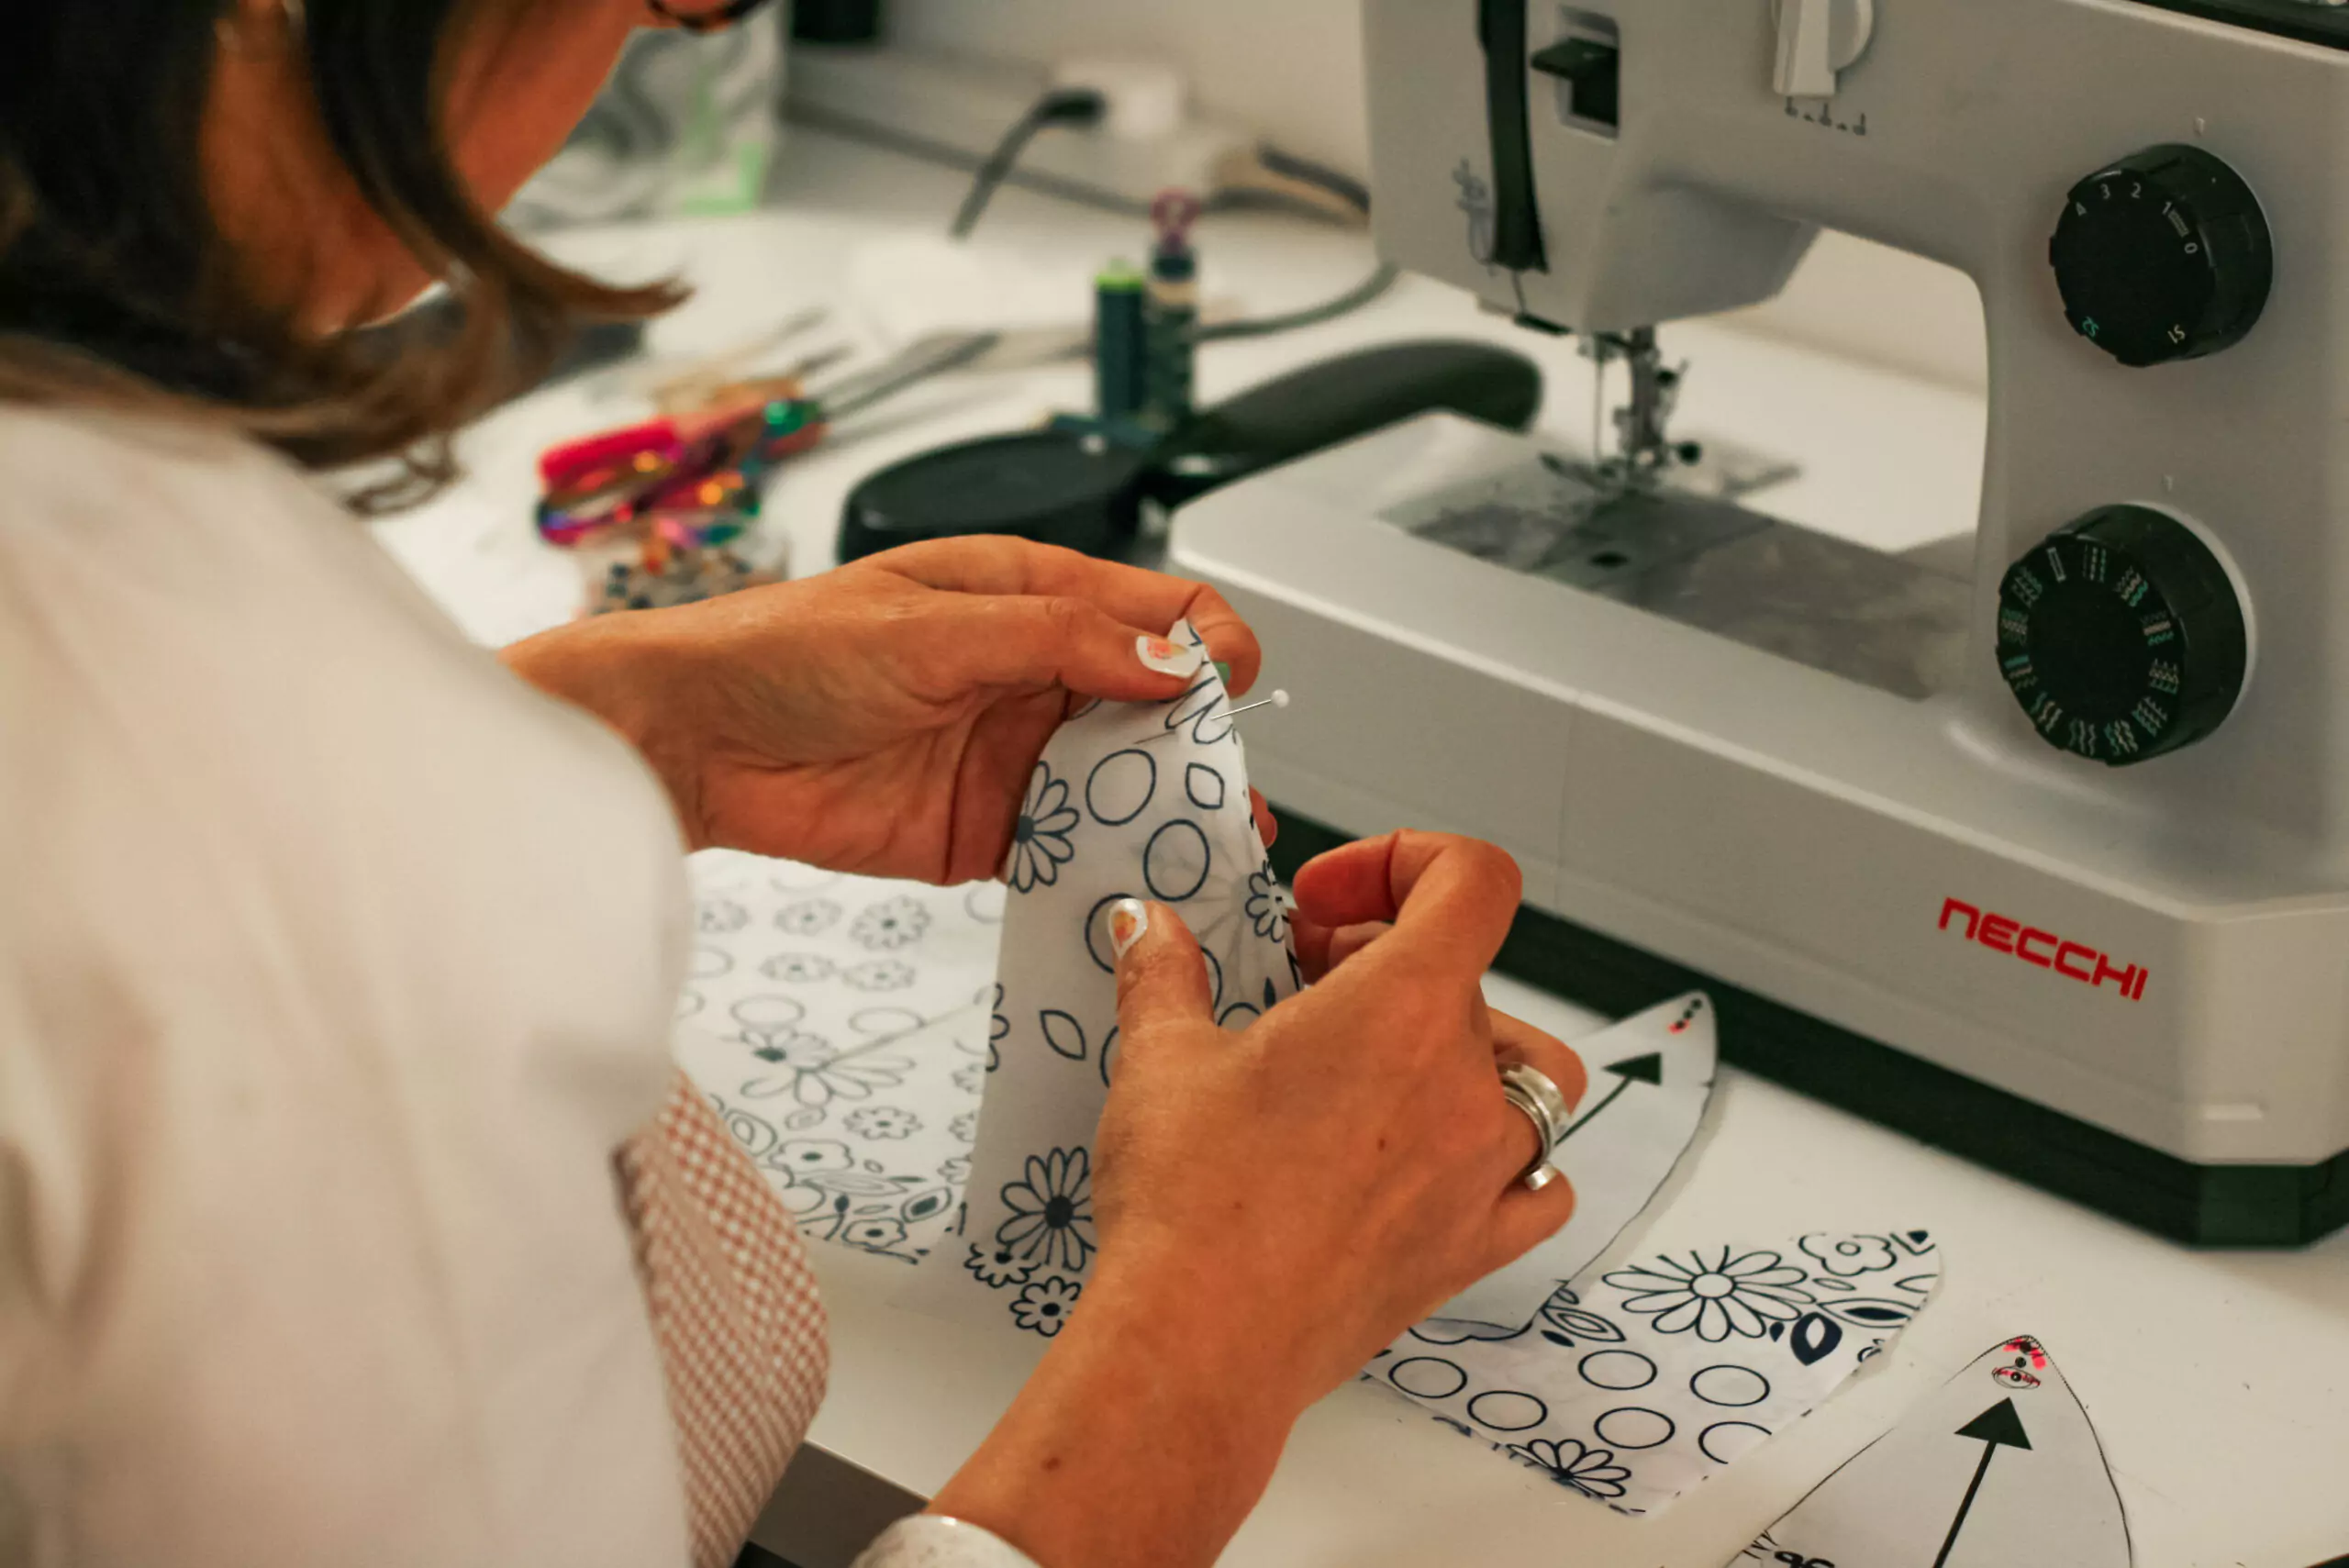 Learn to sew online at your own pace